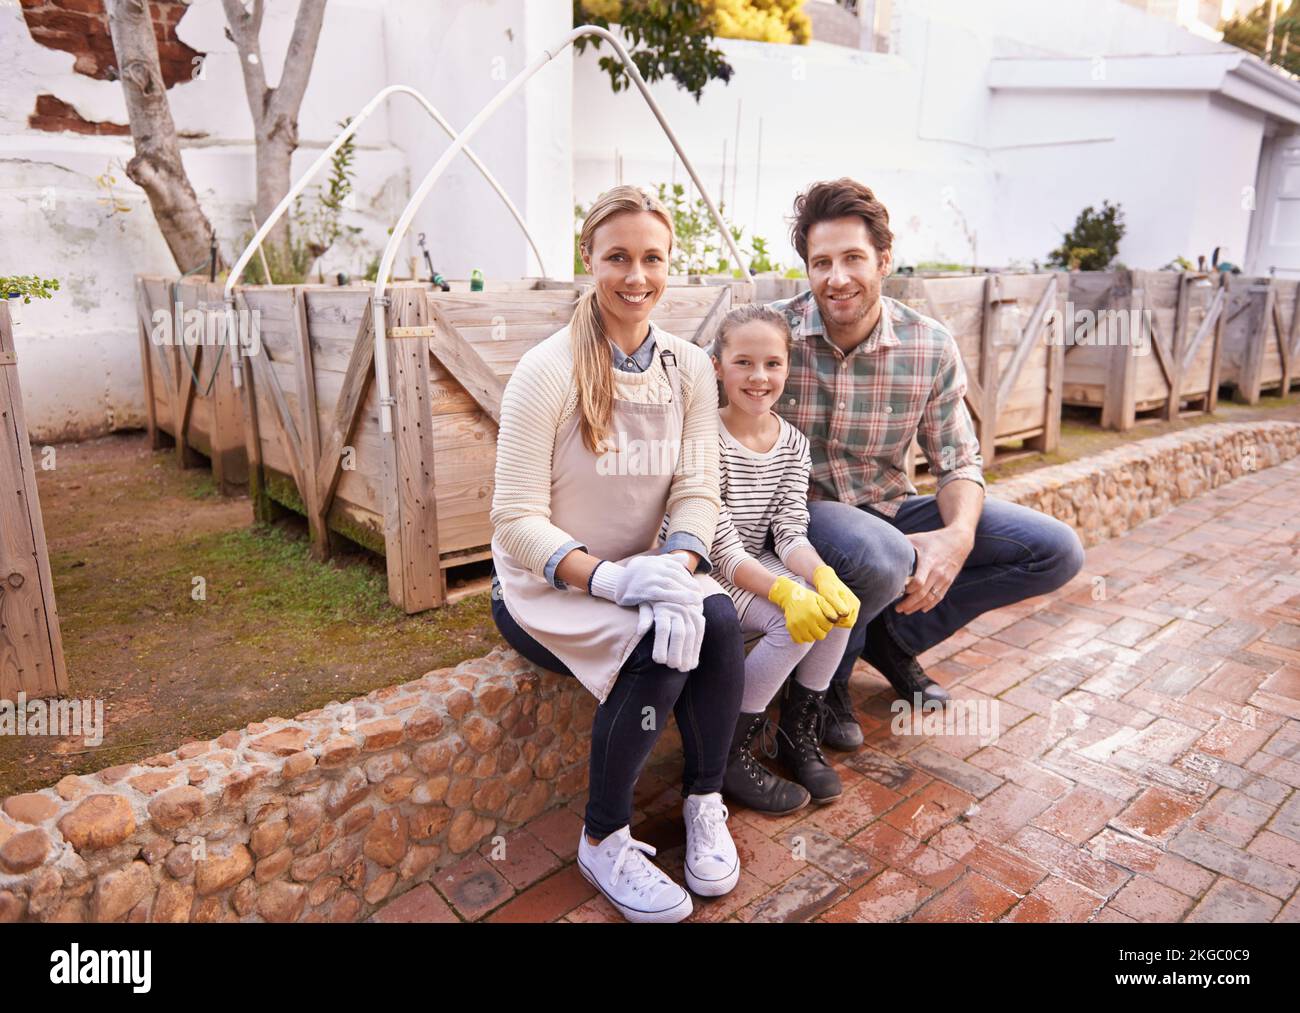 Living organic and healthy. Portrait of a happy family taking a break from their gardening in the their backyard. Stock Photo